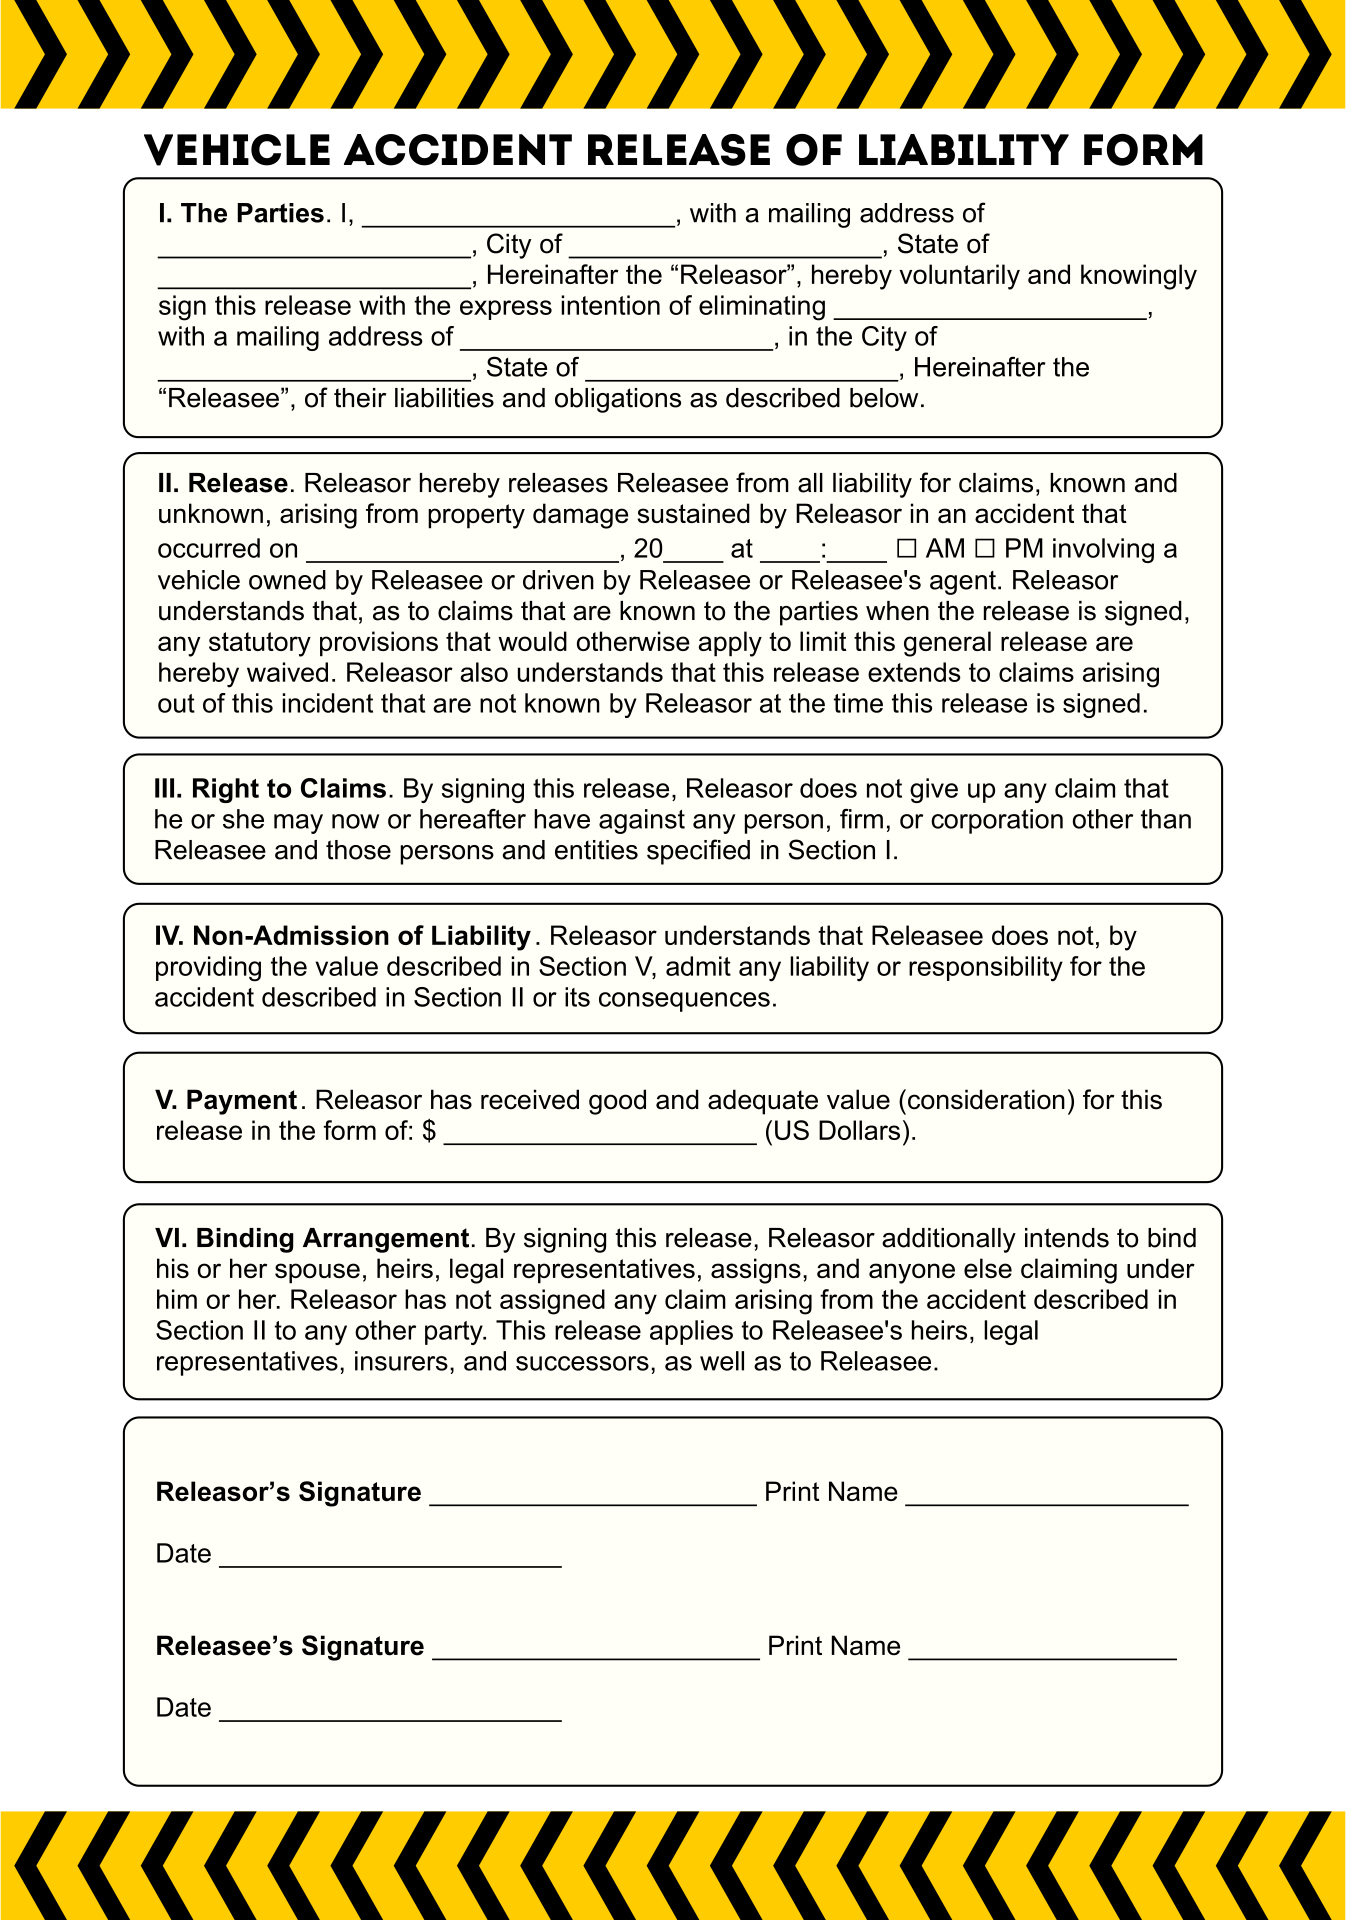 Car Accident Liability Release Form Template